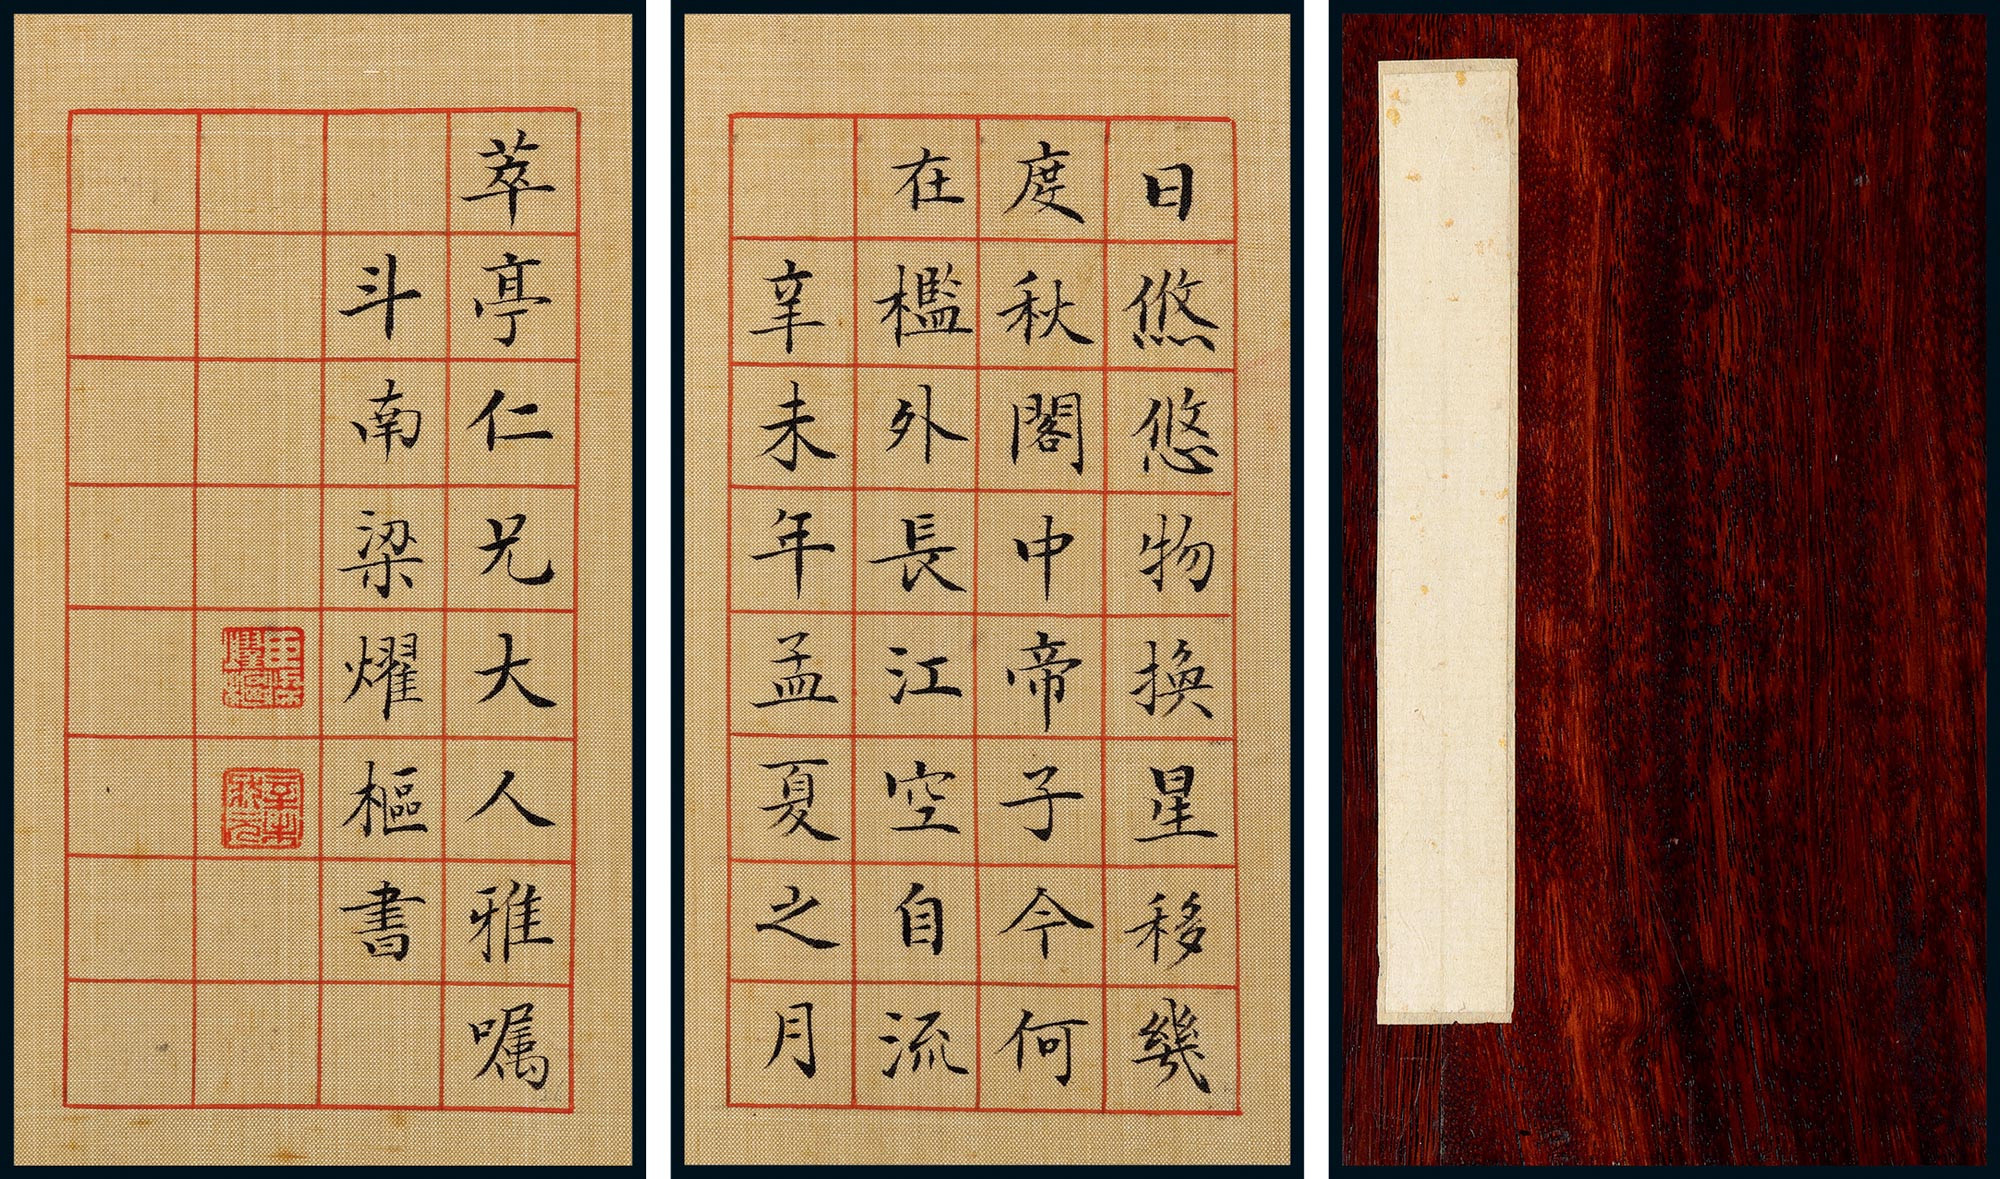 The calligraphic booklet written by Liang Yaoshu